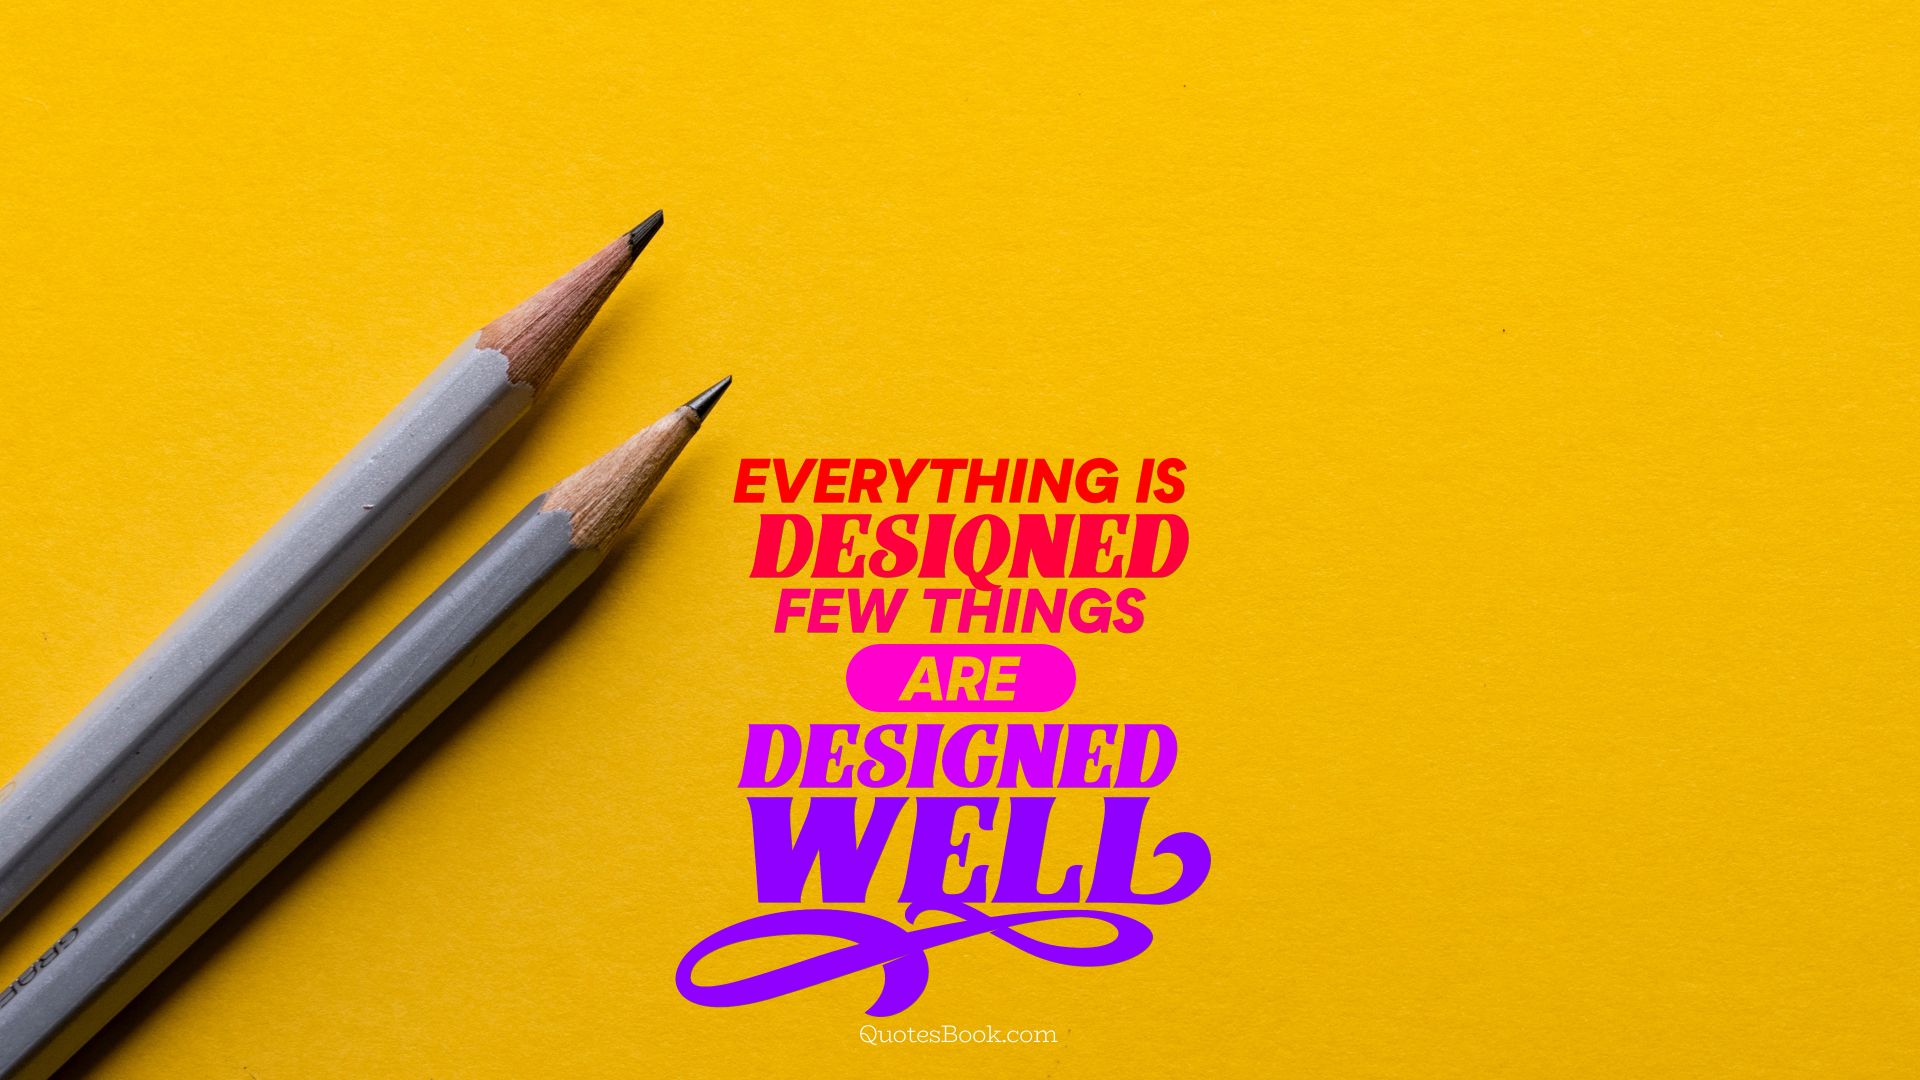 Everything is designed few things are designed well